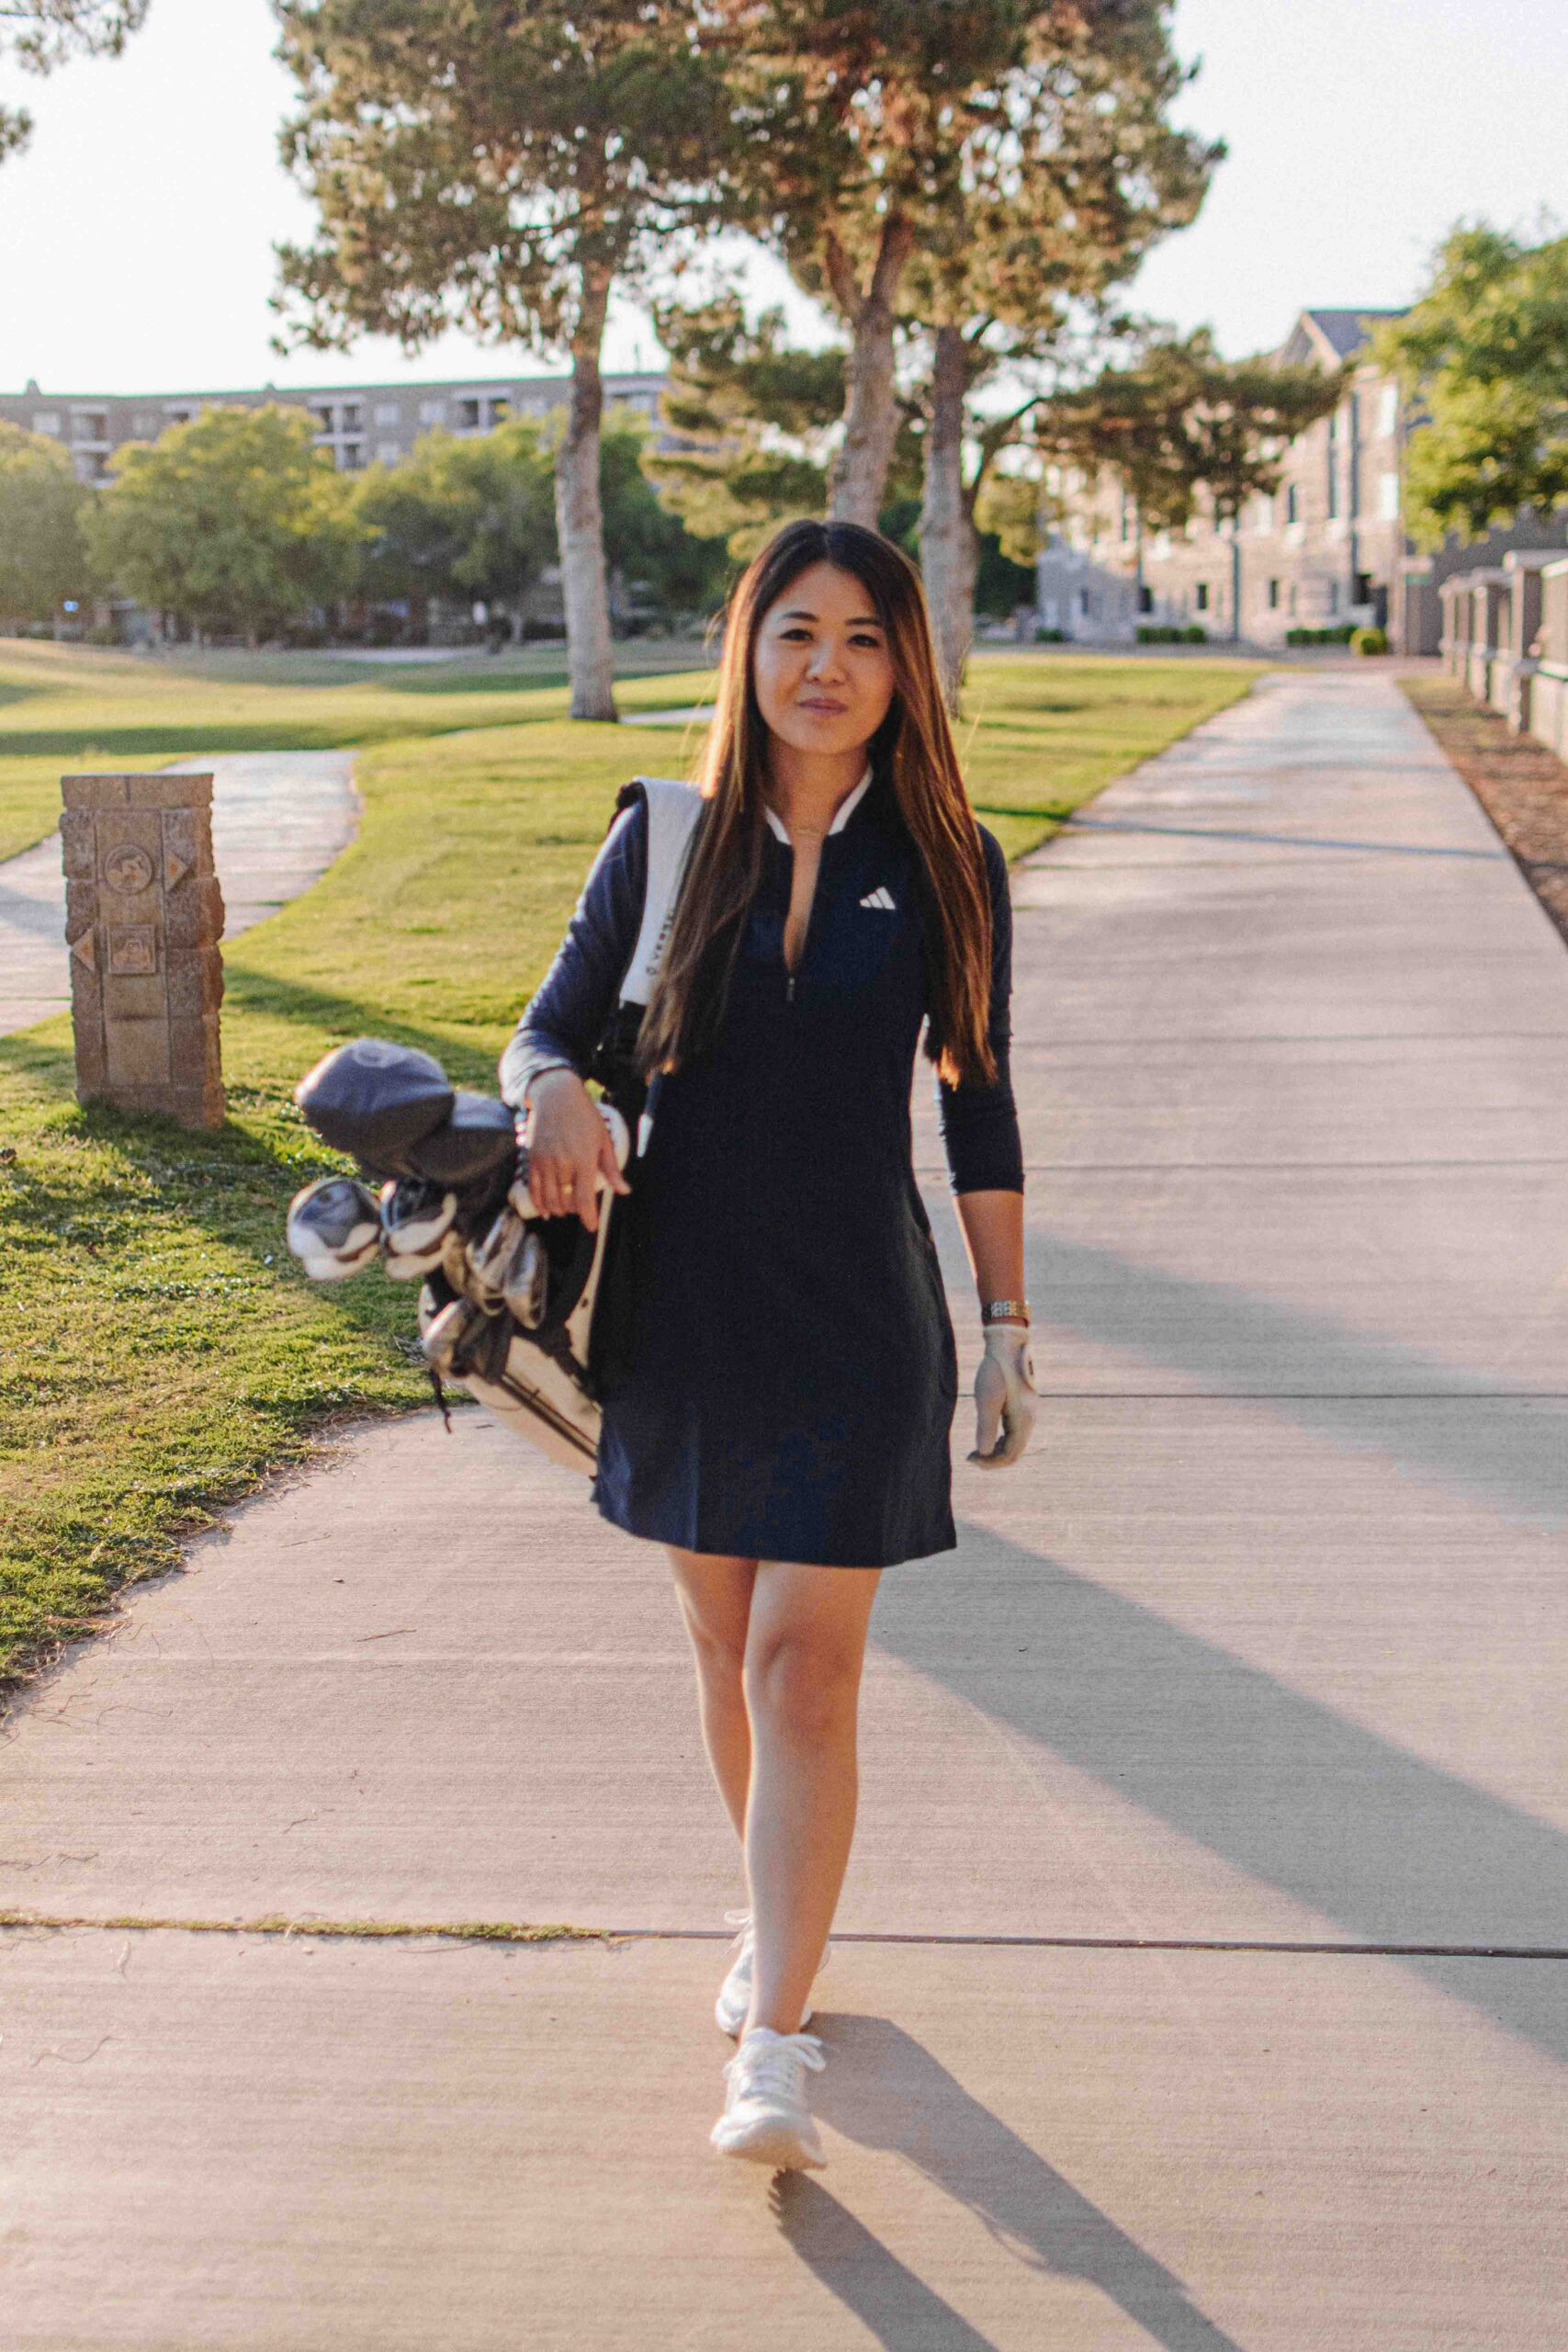 Arizona golfer Demi Bang talks about golfing clothes for women.